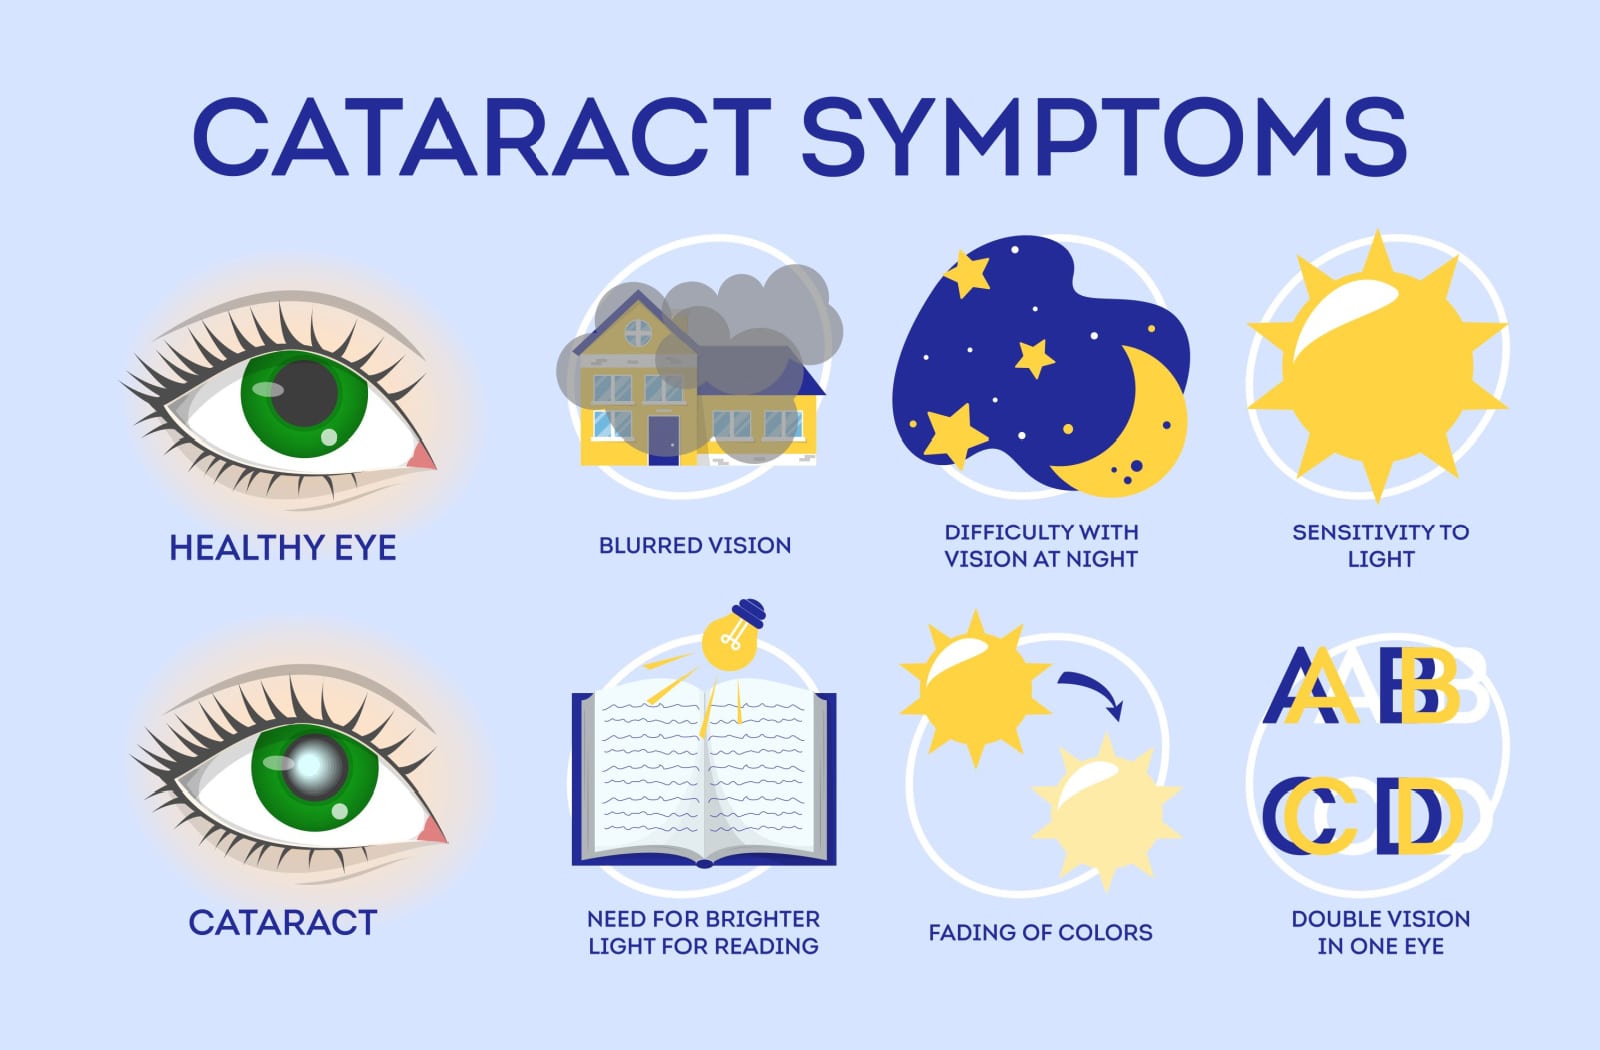 A graphic describing common symptoms of cataracts, like blurred vision and double vision in one eye